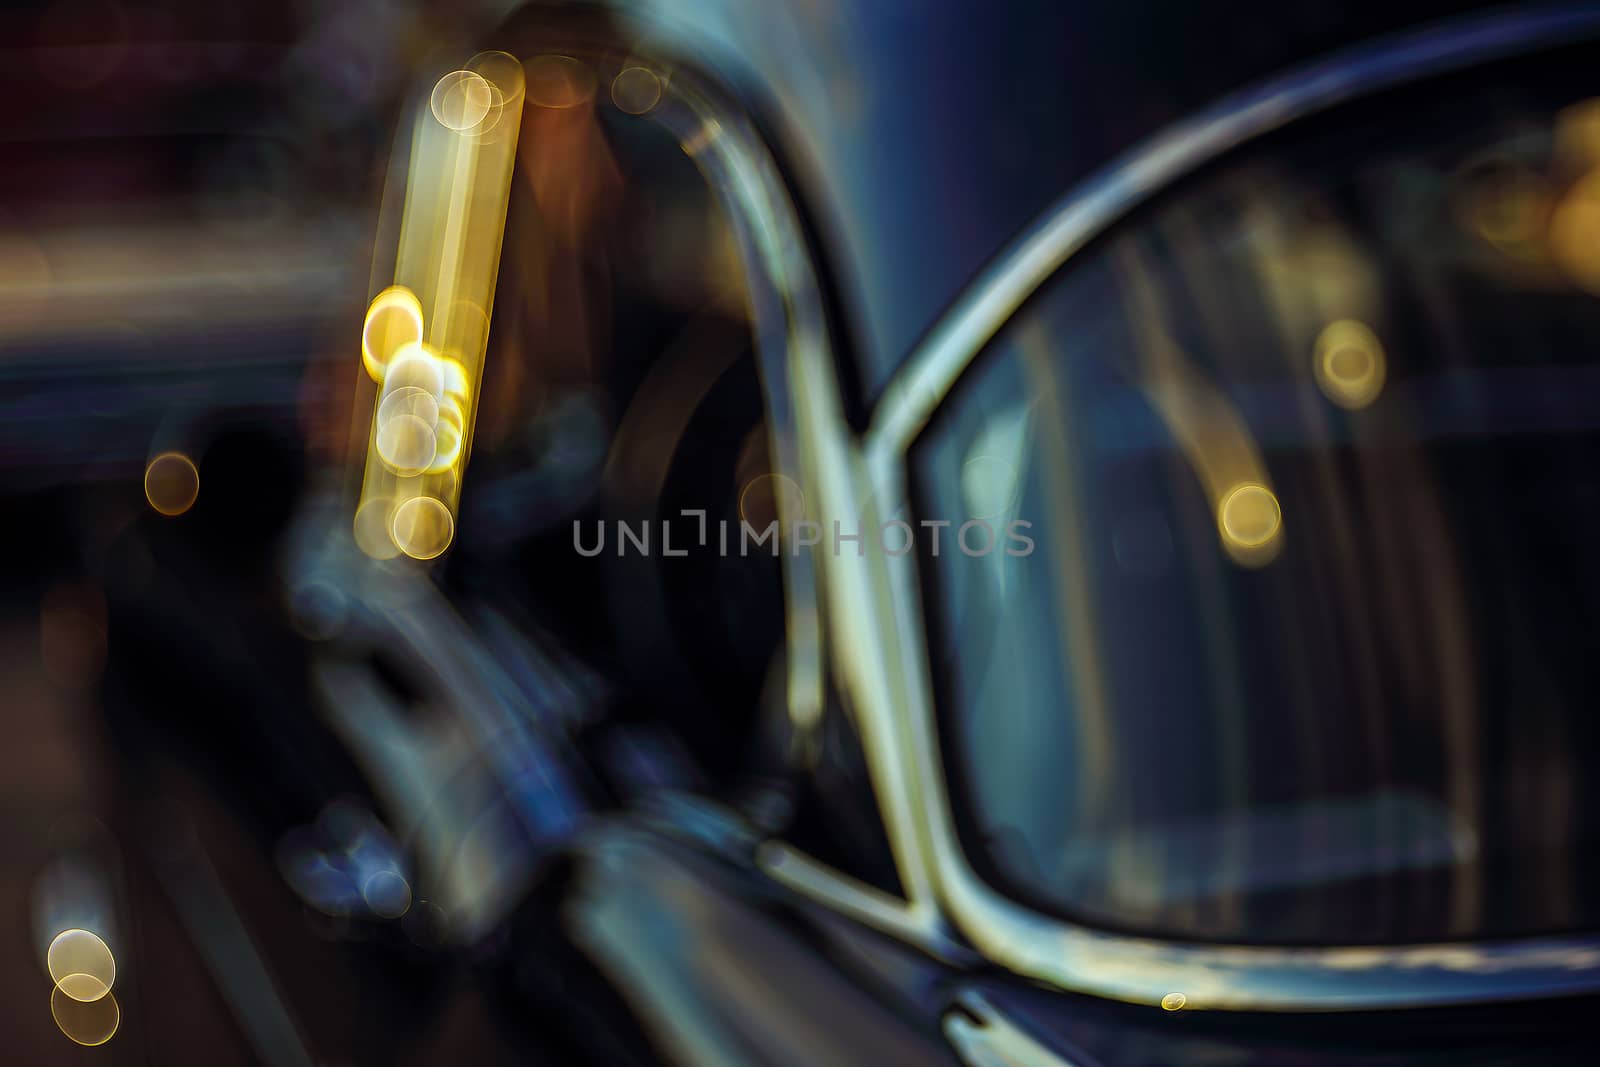 Colorful abstract background retro car. Boke background with copy space. Close-up view vintage American auto details with bubble bokeh effect. Evening.